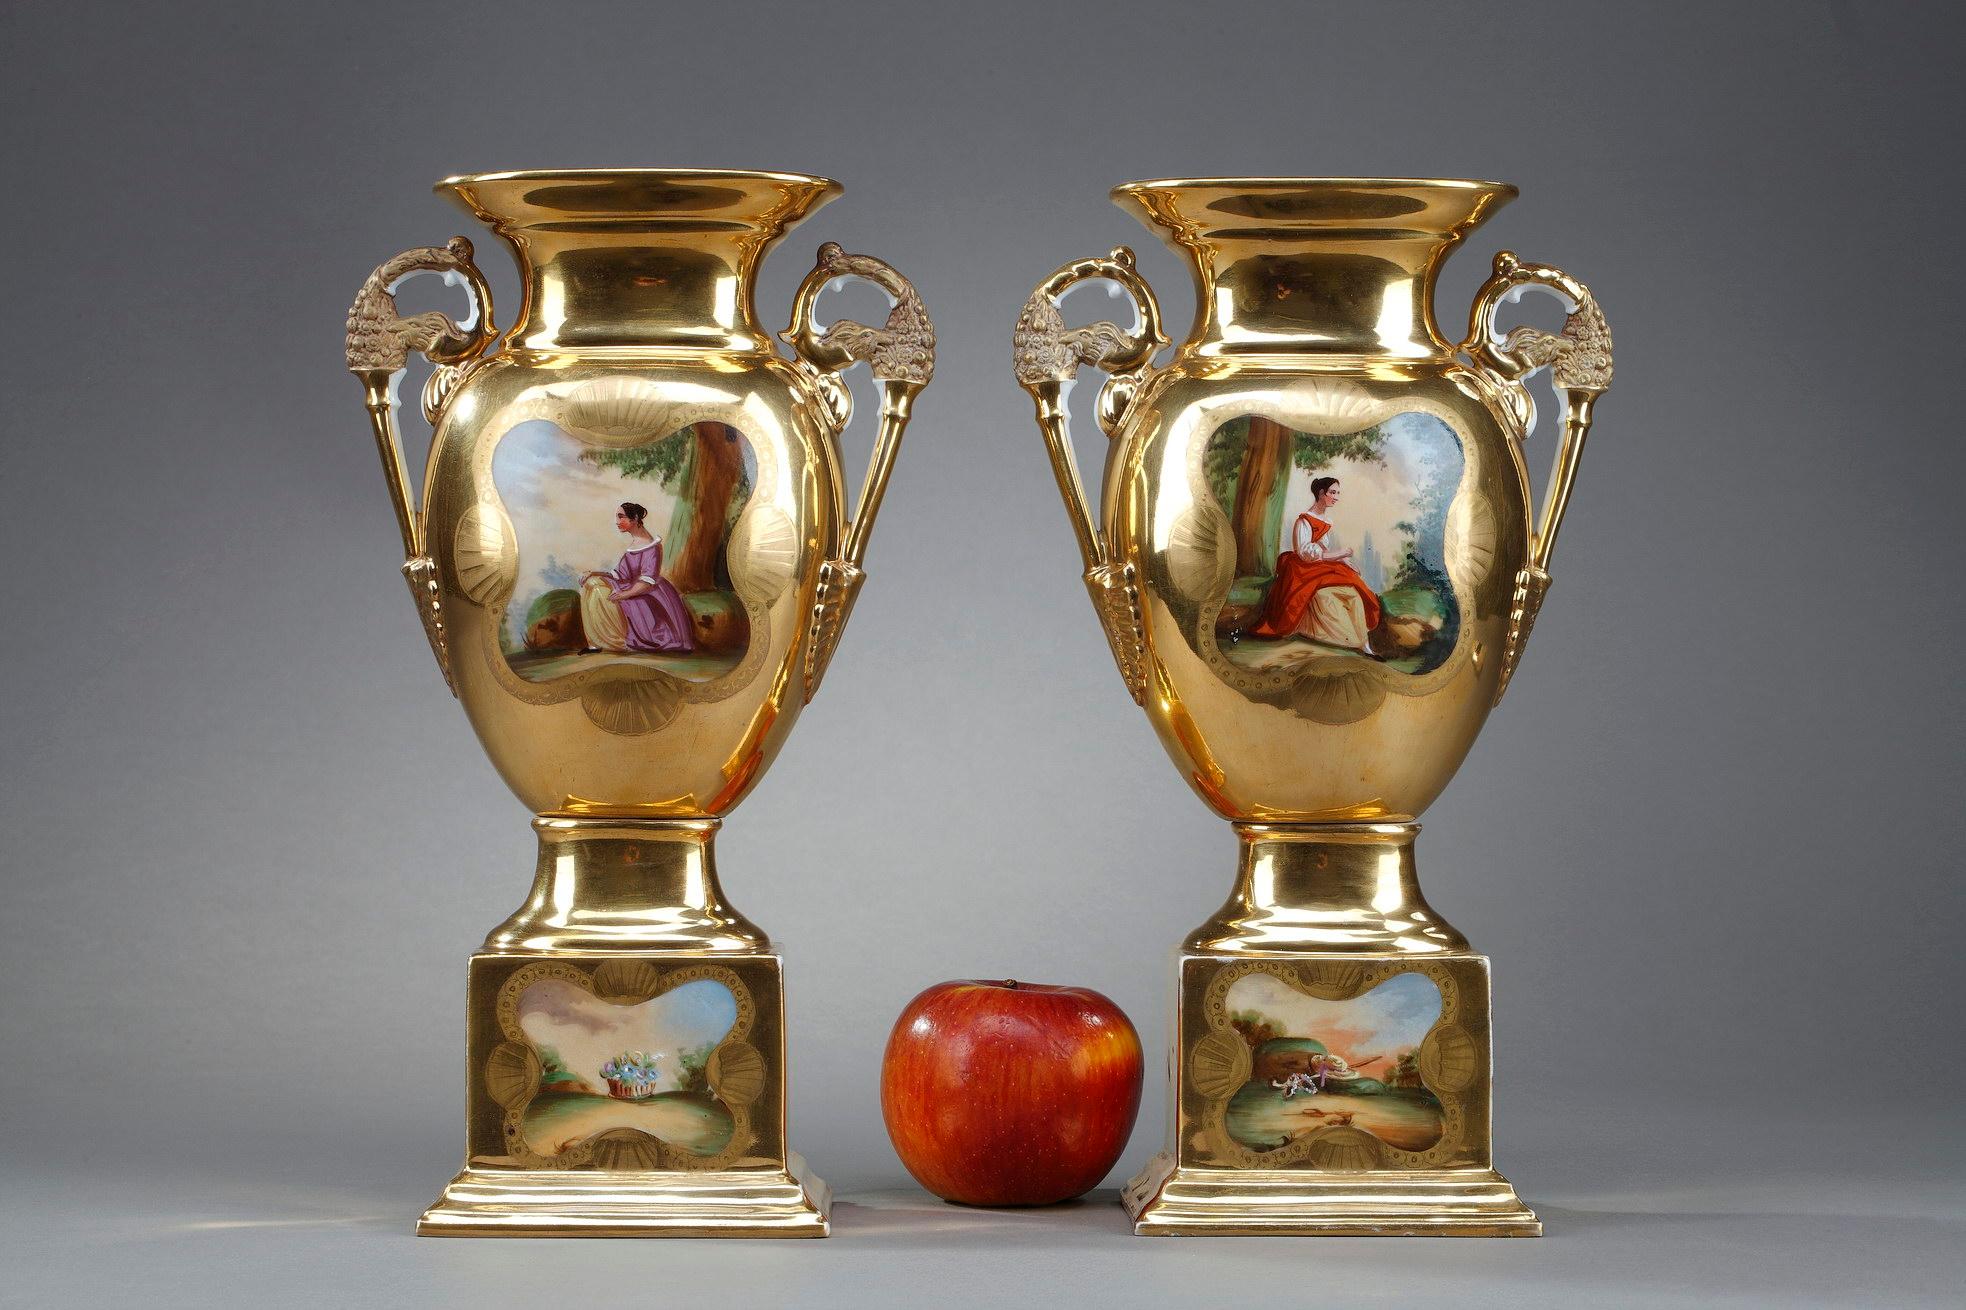 Pair of oratory vases of the Louis-Philippe period in Paris porcelain with golden highlights and polychrome decoration in reserves of Elegantes representing two young women in a forest setting, dressed in summer colors. The handles are engraved with